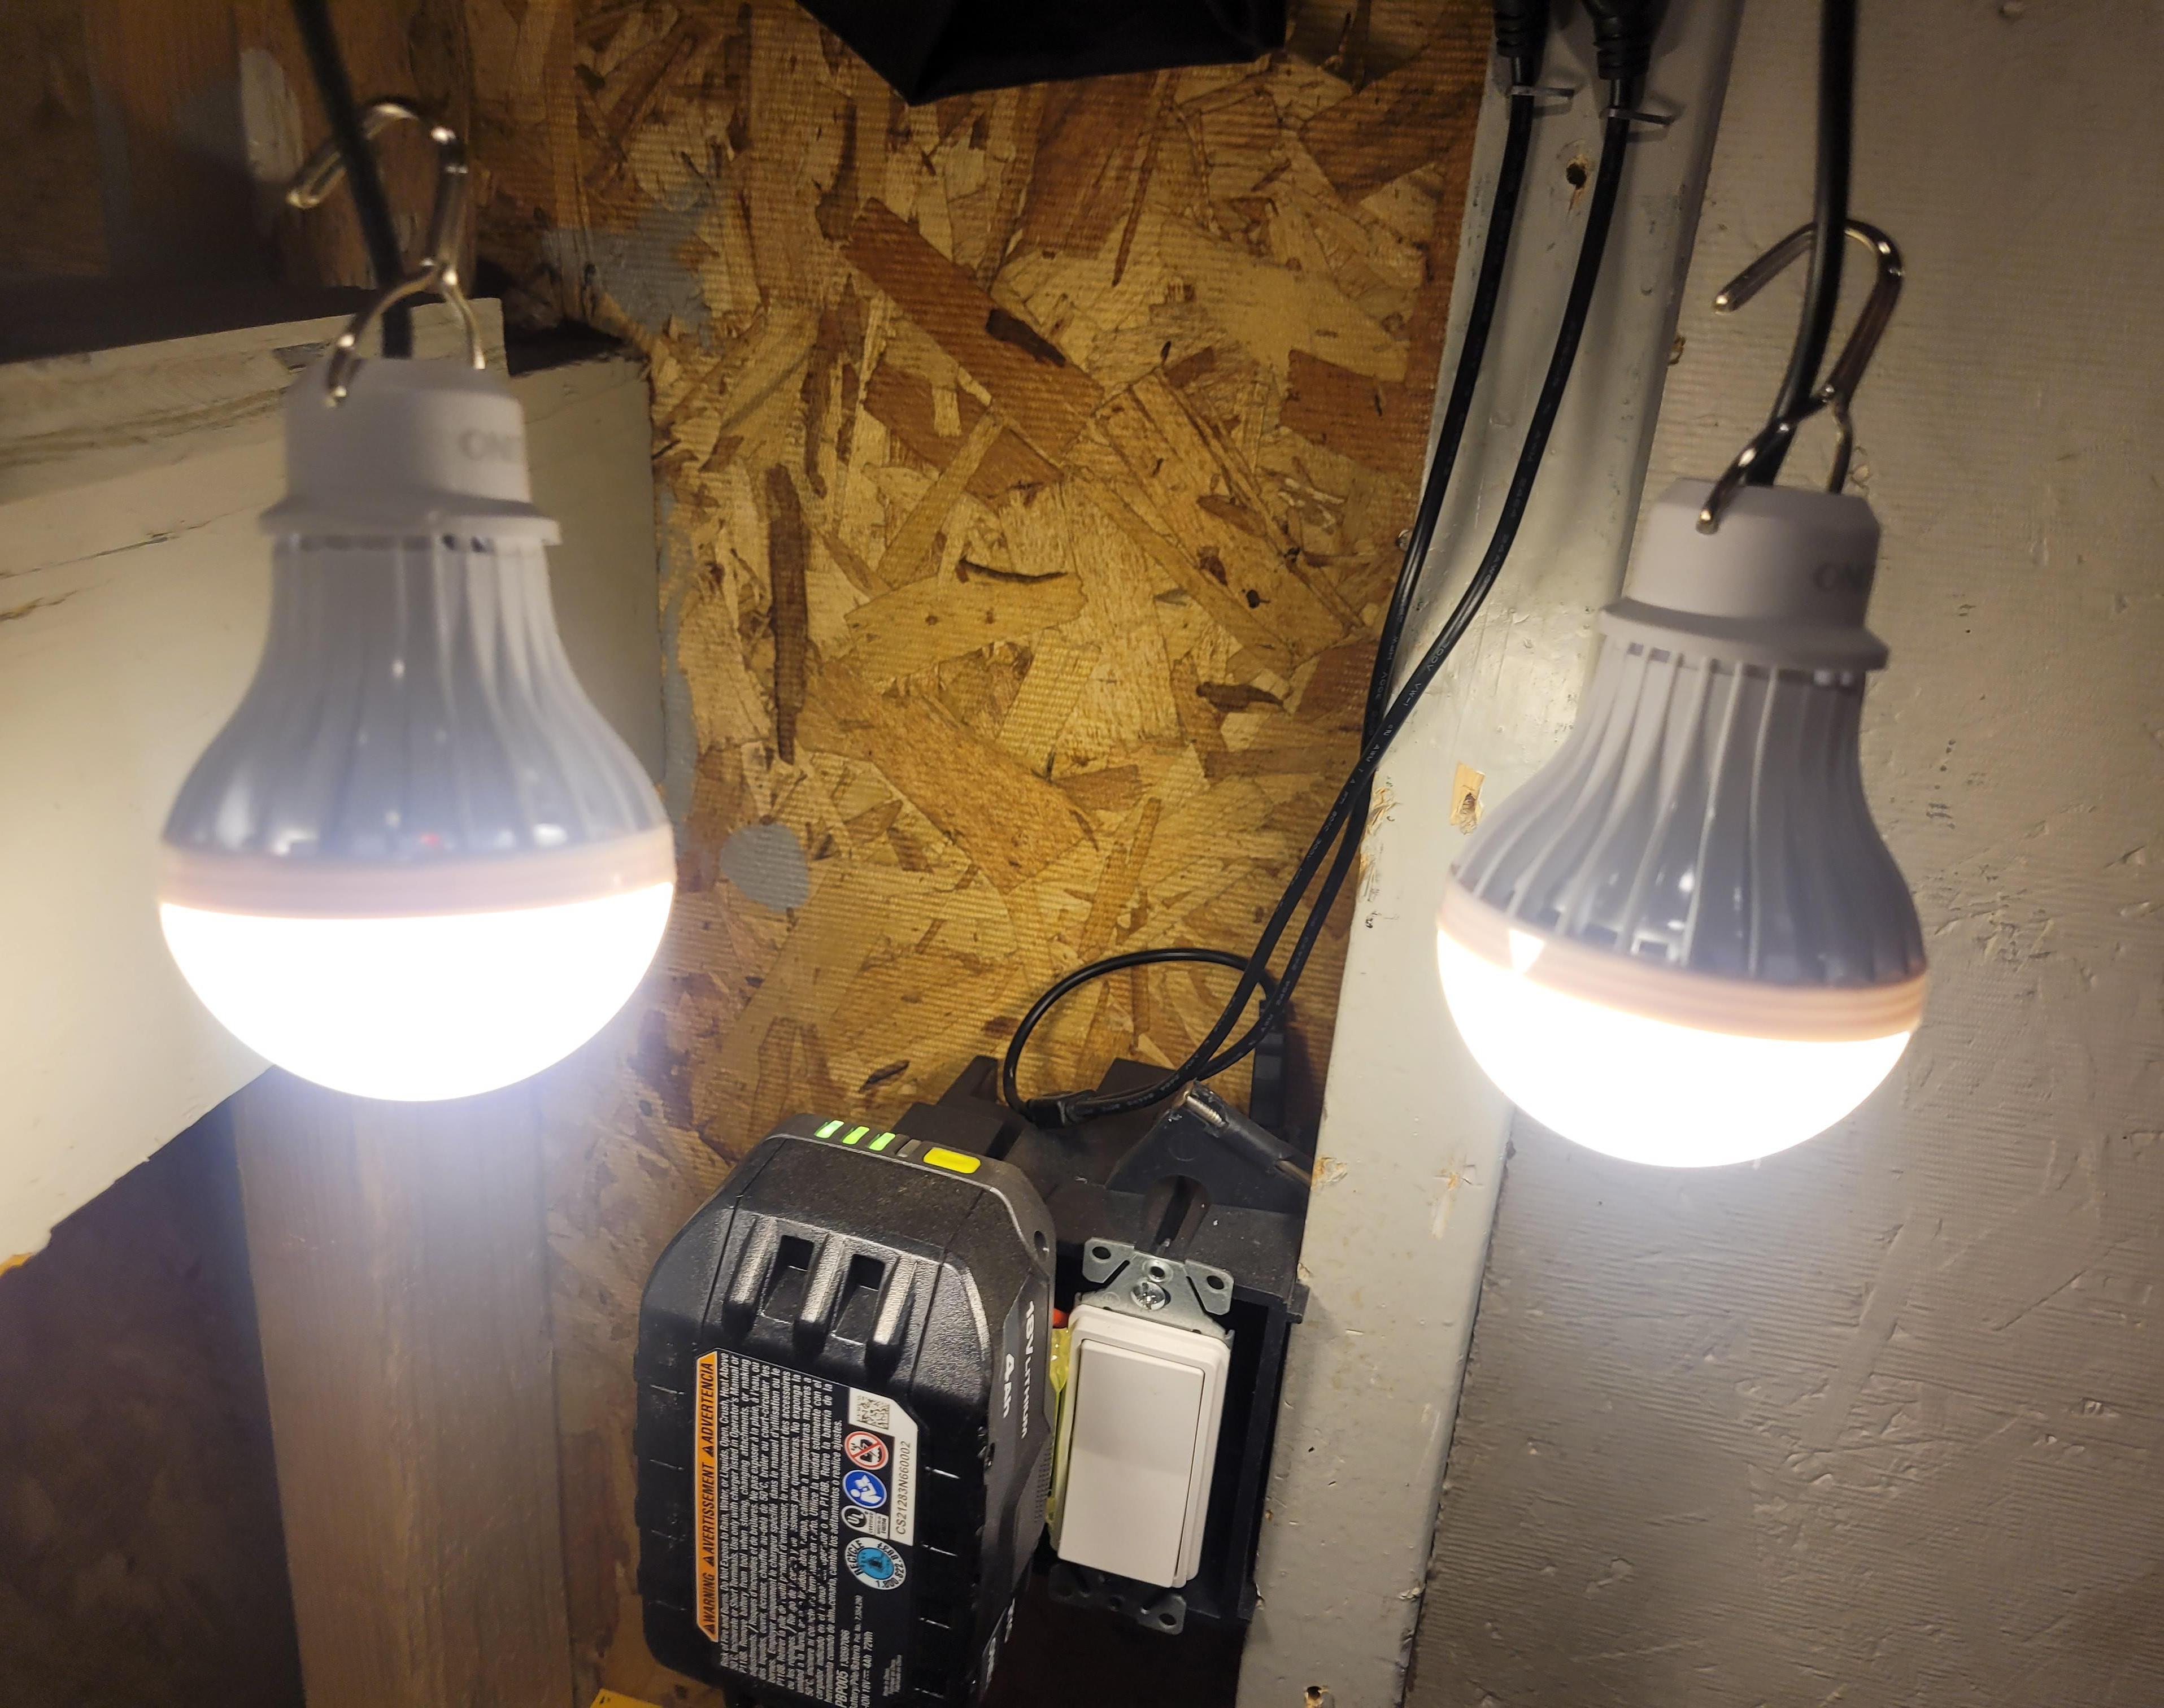 Ryobi 18v Battery Shed Lighting System, USB 5v – Off Grid Lighting for Your Shed Using Ryobi Batteries, Quick and Easy With No Soldering Required!